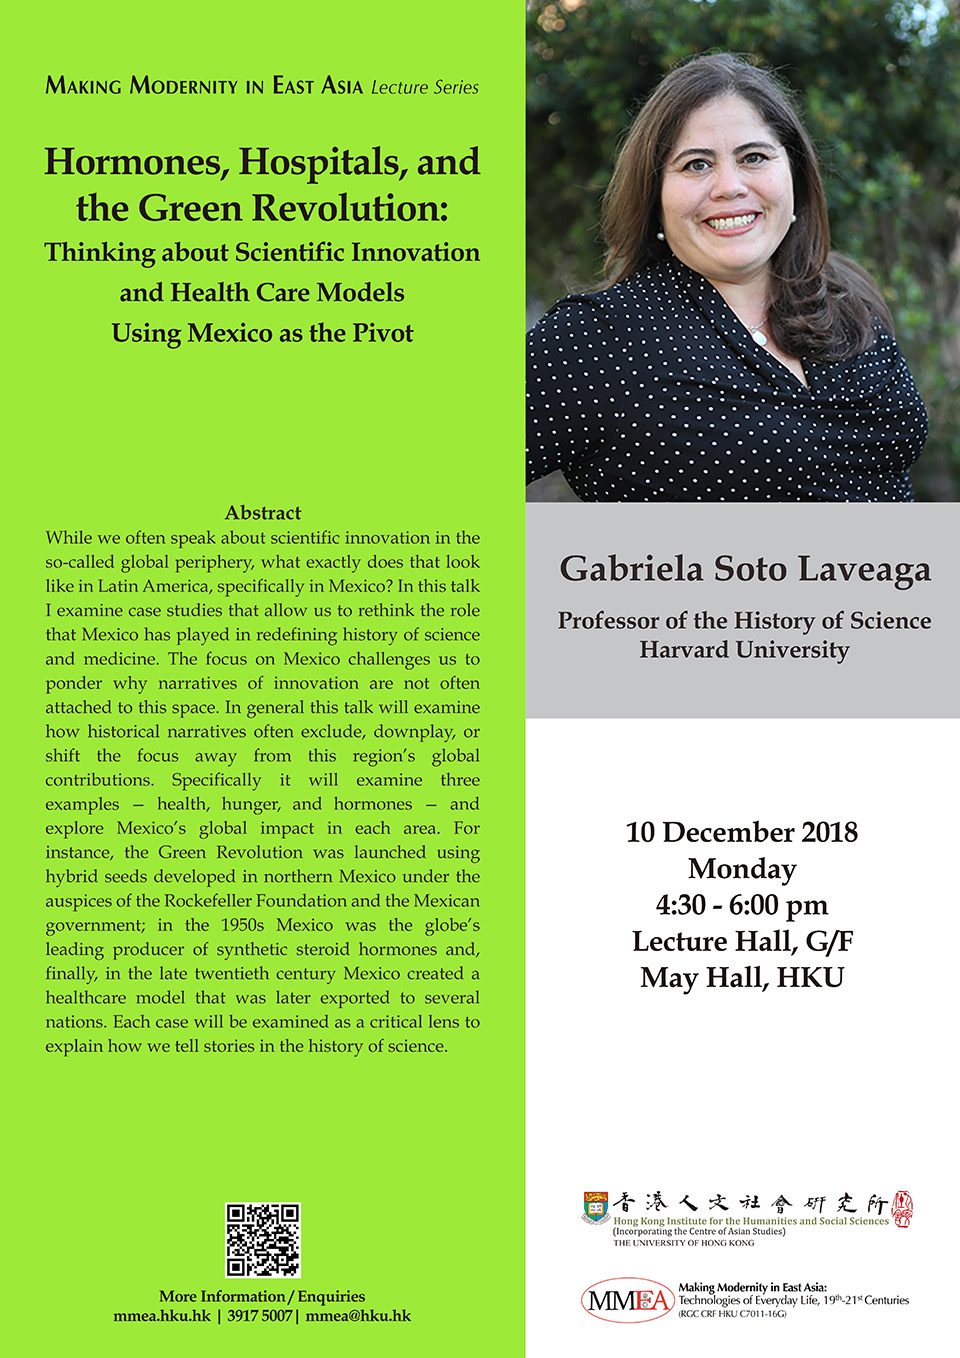 MMEA Lecture Series “Hormones, Hospitals, and the Green Revolution: Thinking about Scientific Innovation and Health Care Models Using Mexico as the Pivot” by Professor Gabriela Soto Laveaga (December 10, 2018)